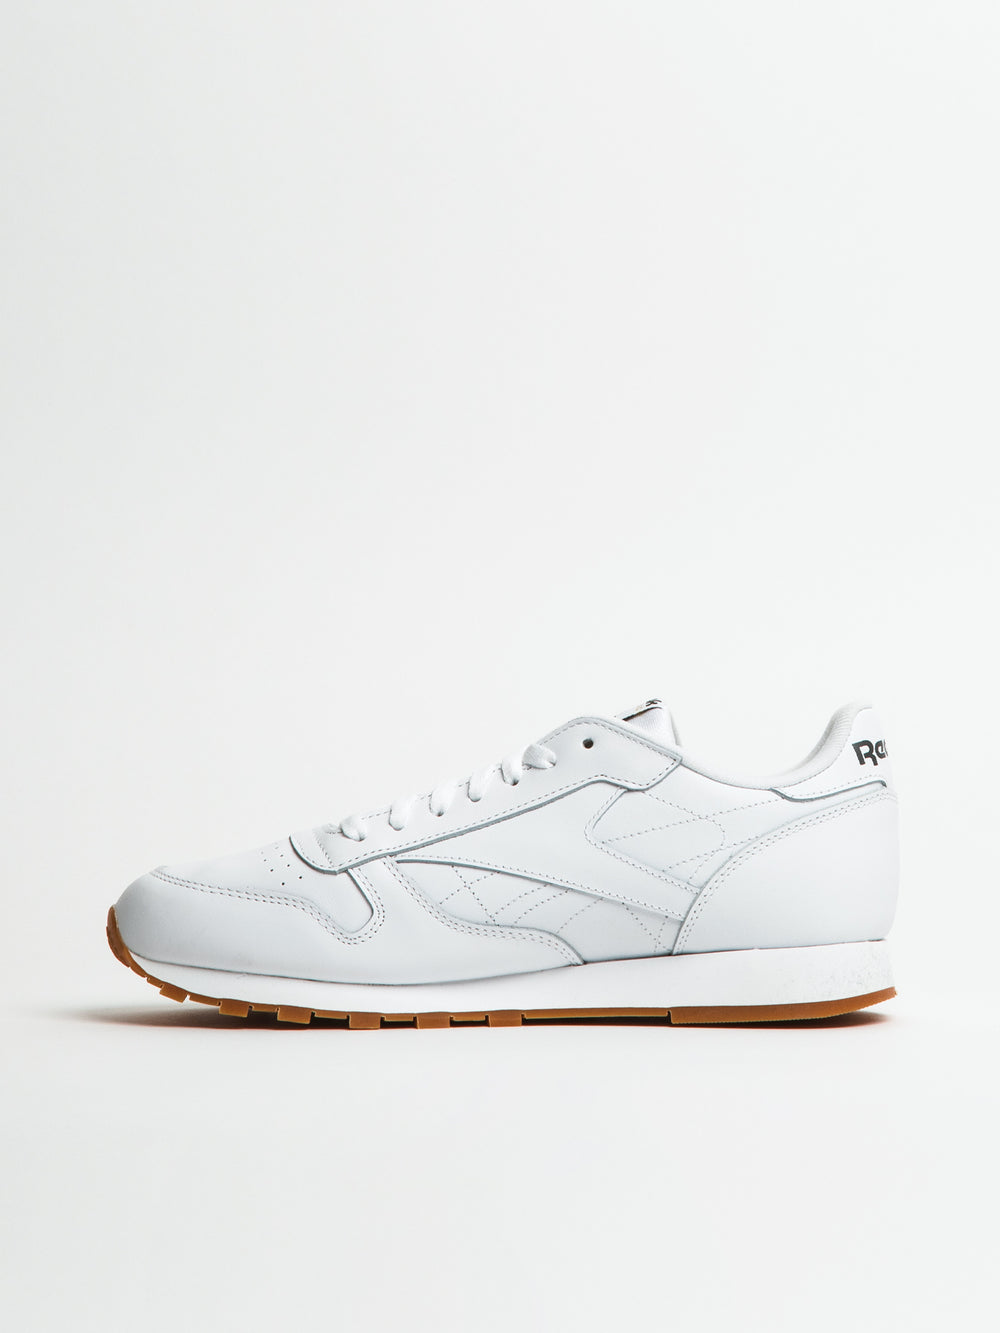 MENS REEBOK CLASSIC LEATHER SNEAKERS - CLEARANCE